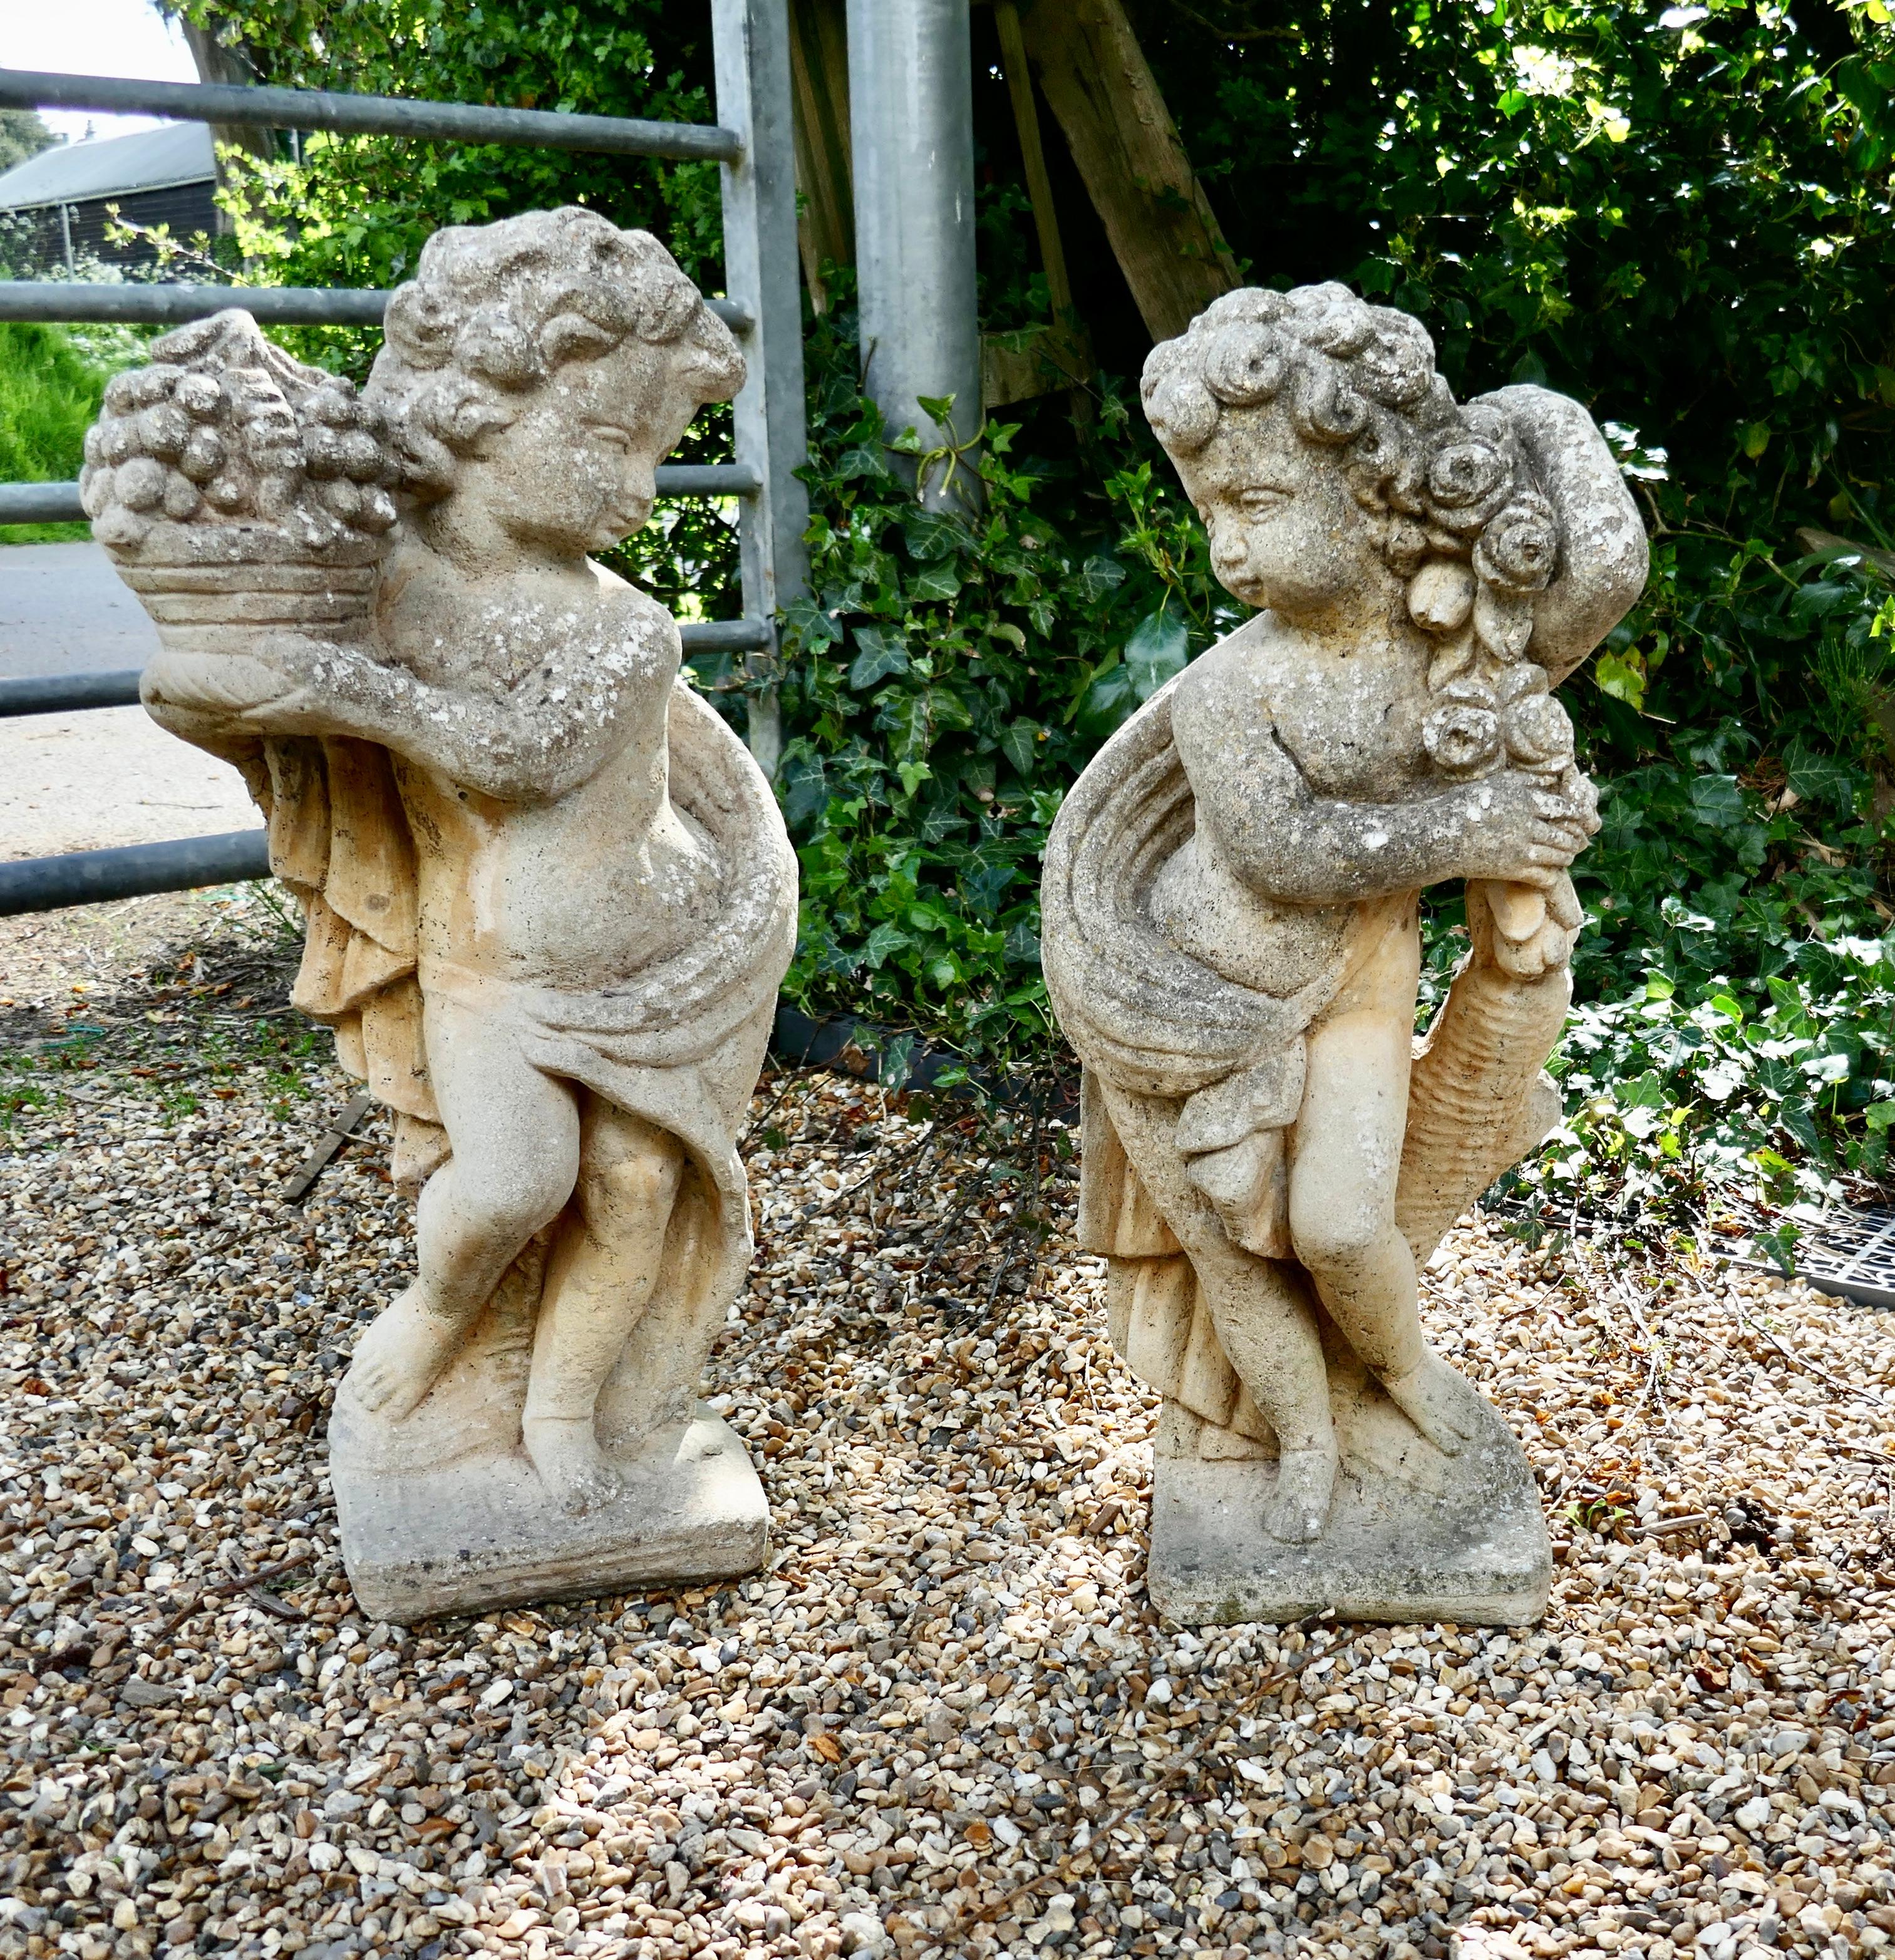 A Pair of Old Weathered Classical Flower Children Statues 

These are lovely old statues, they are a boy and girl, he is holding a basket of Fruit and she has a Rose Garland they have cute facial expressions
The children face one another and have